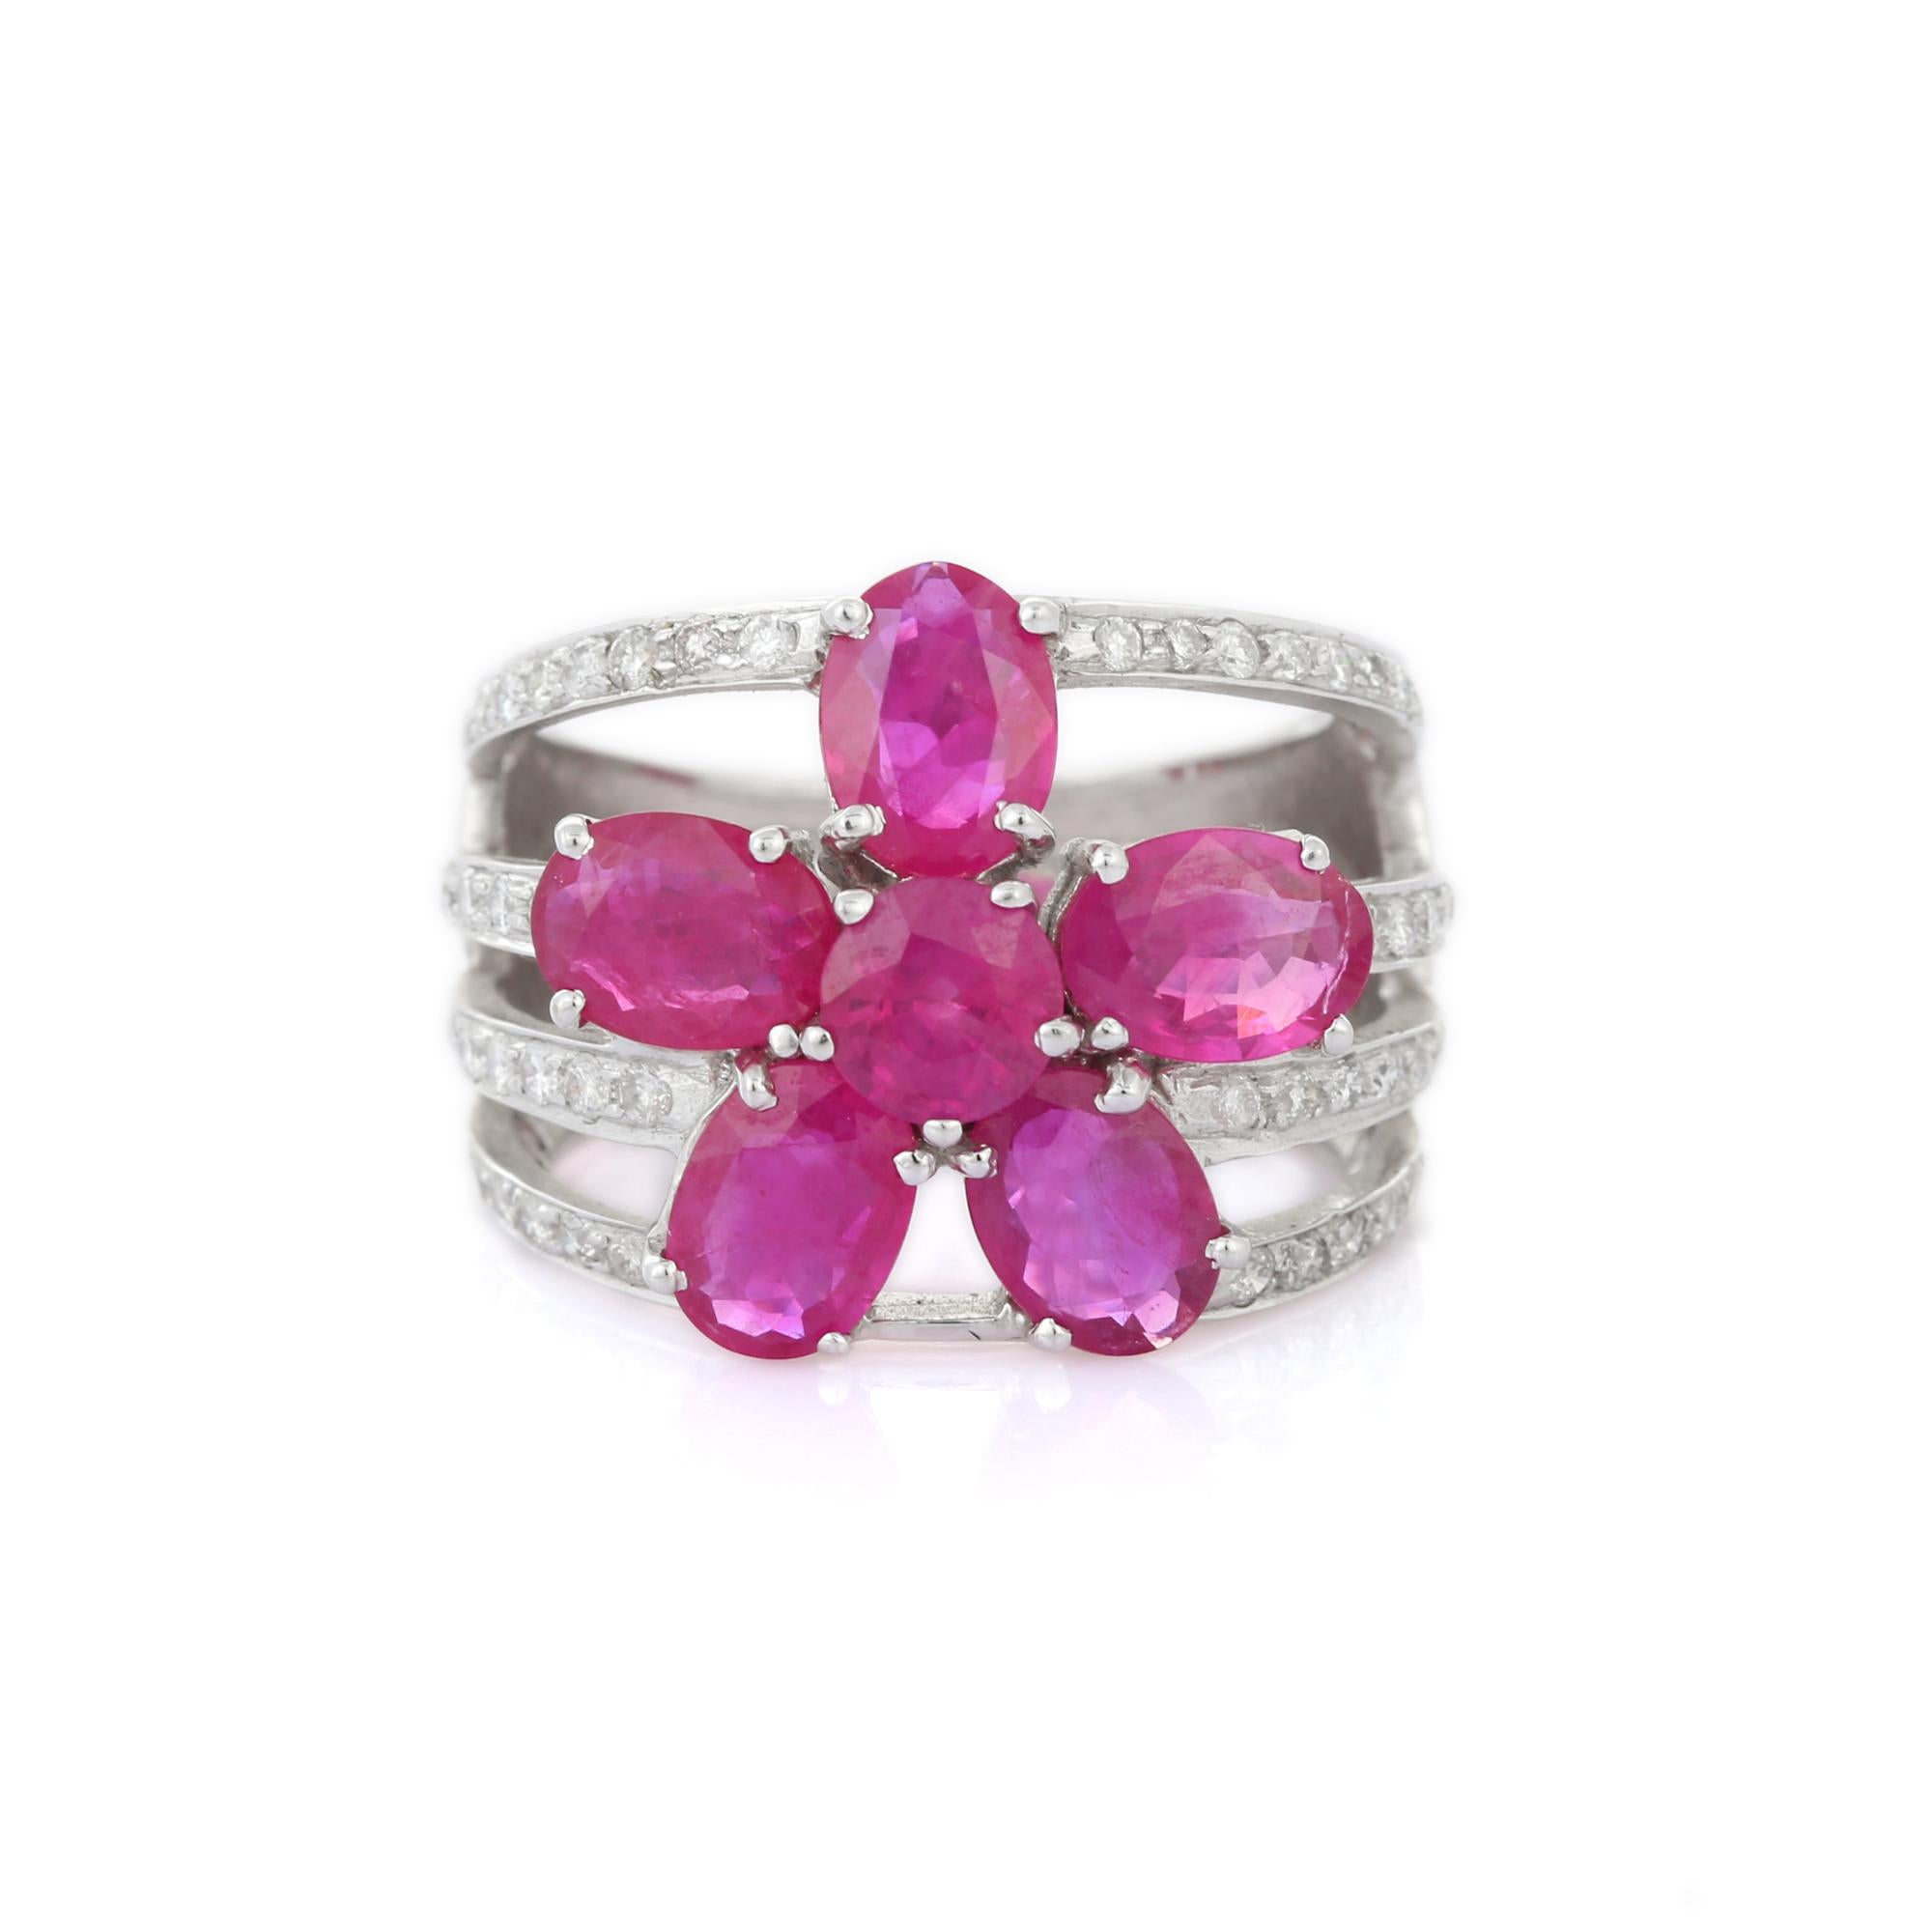 For Sale:  5.1 Ct Ruby Statement Flower Ring with Diamonds 18k Solid White Gold 2